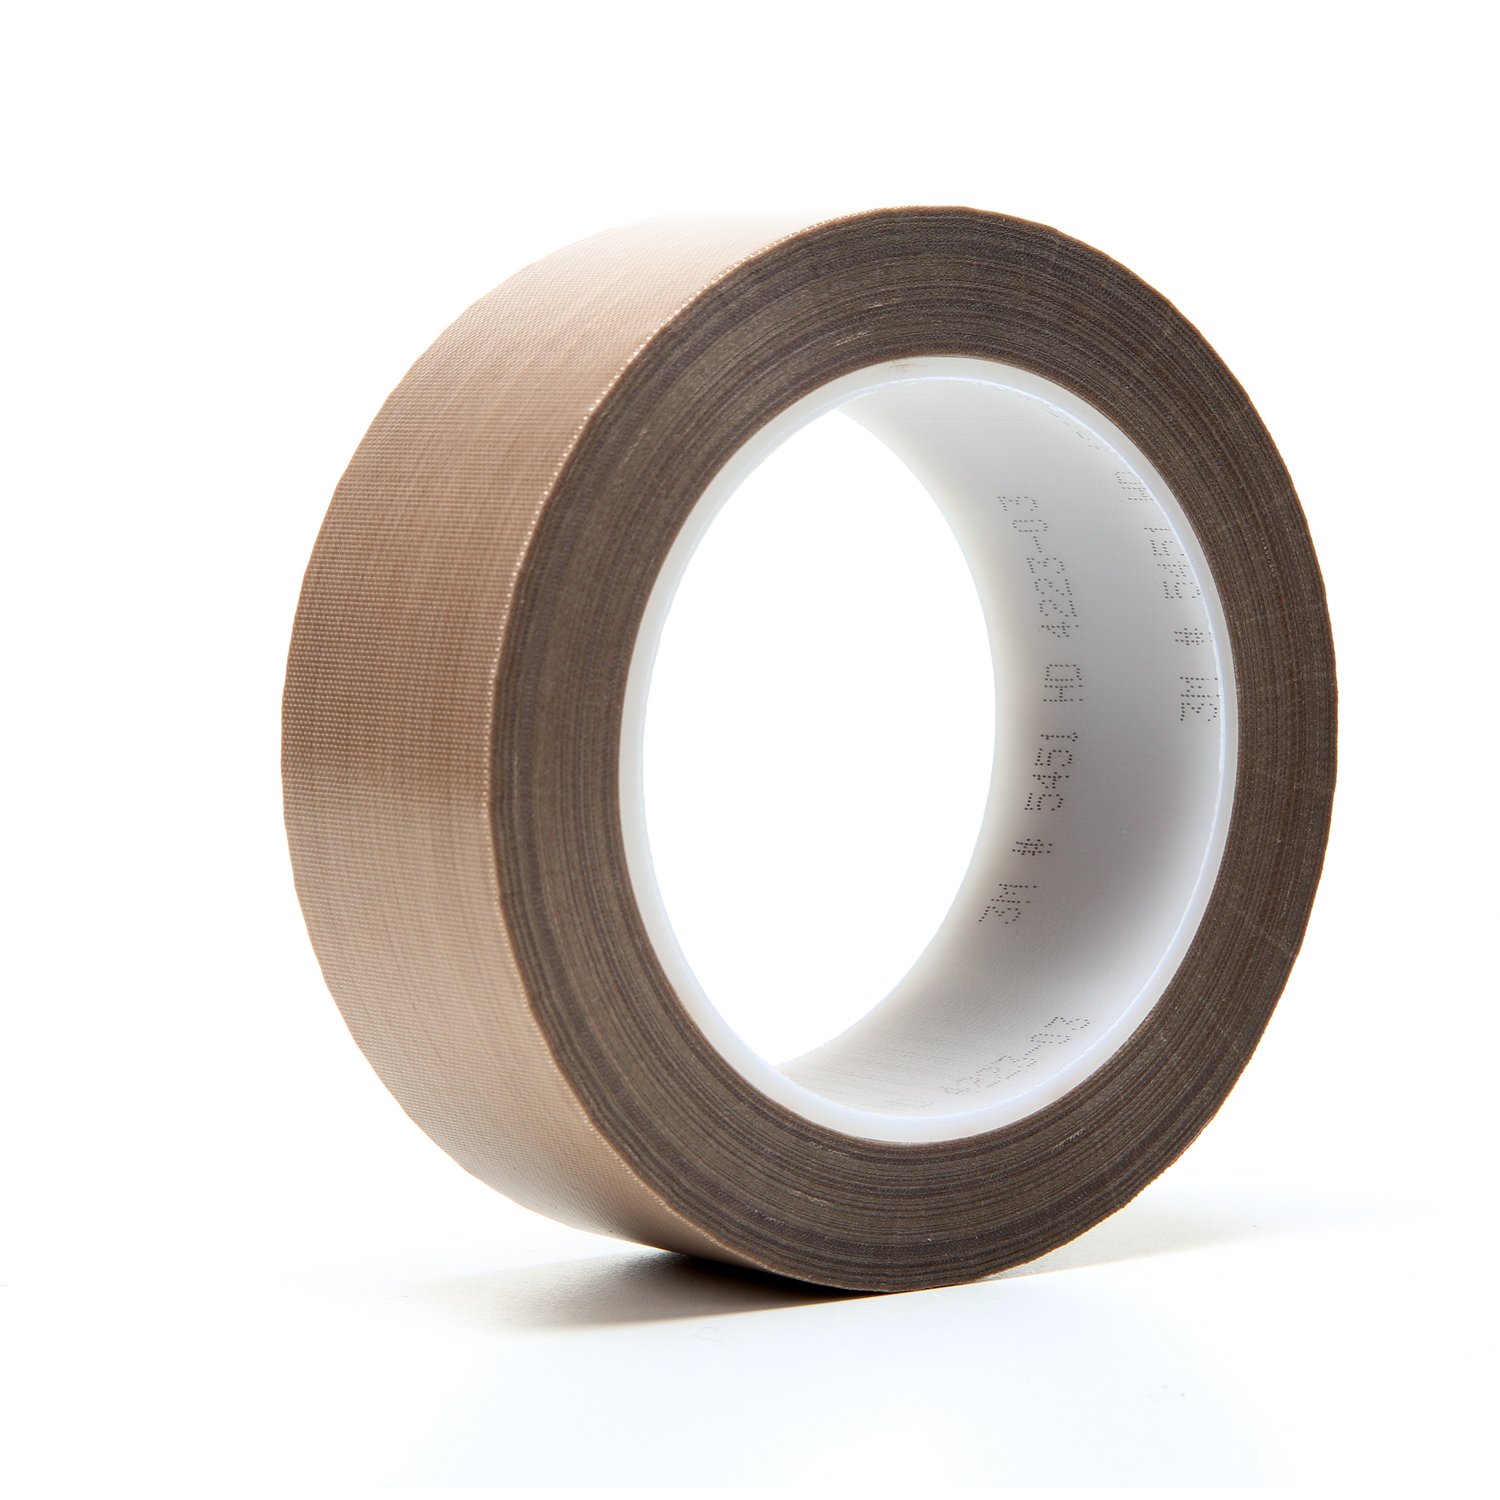 7000050134 - 3M PTFE Glass Cloth Tape 5451, Brown, 1 1/2 in x 36 yd, 5.6 mil, 6
rolls per case, Boxed